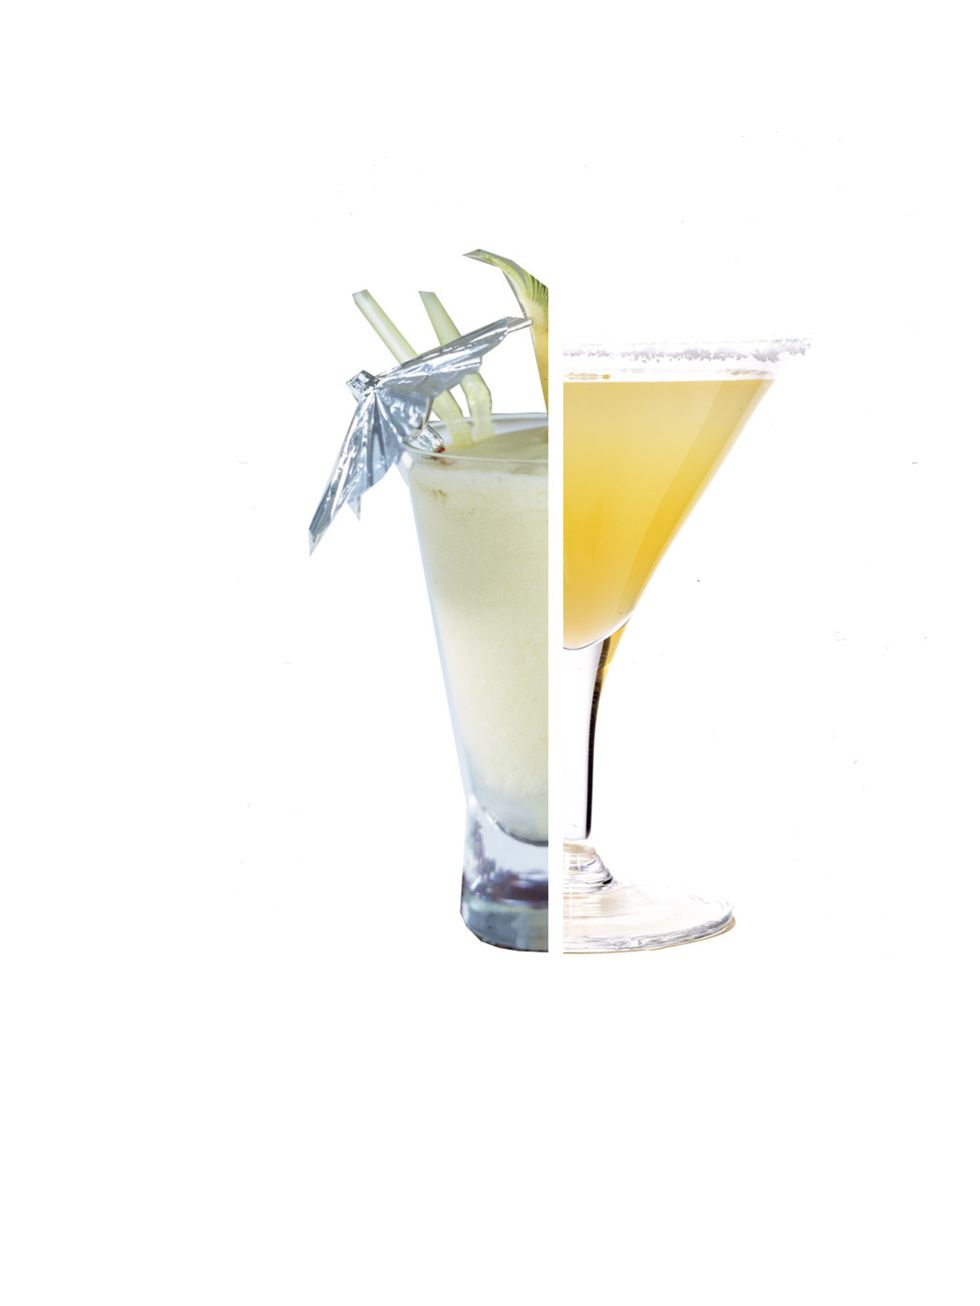 <p><strong>Pina Colada vs Margarita</strong></p><p><strong>Pina Colada: </strong>Up to 500 calories for a large cocktail glass with 17 grams of fat</p><p><strong>Margarita: </strong>160 calories for a cocktail with 0.8 grams of fat</p><p><strong>Calories